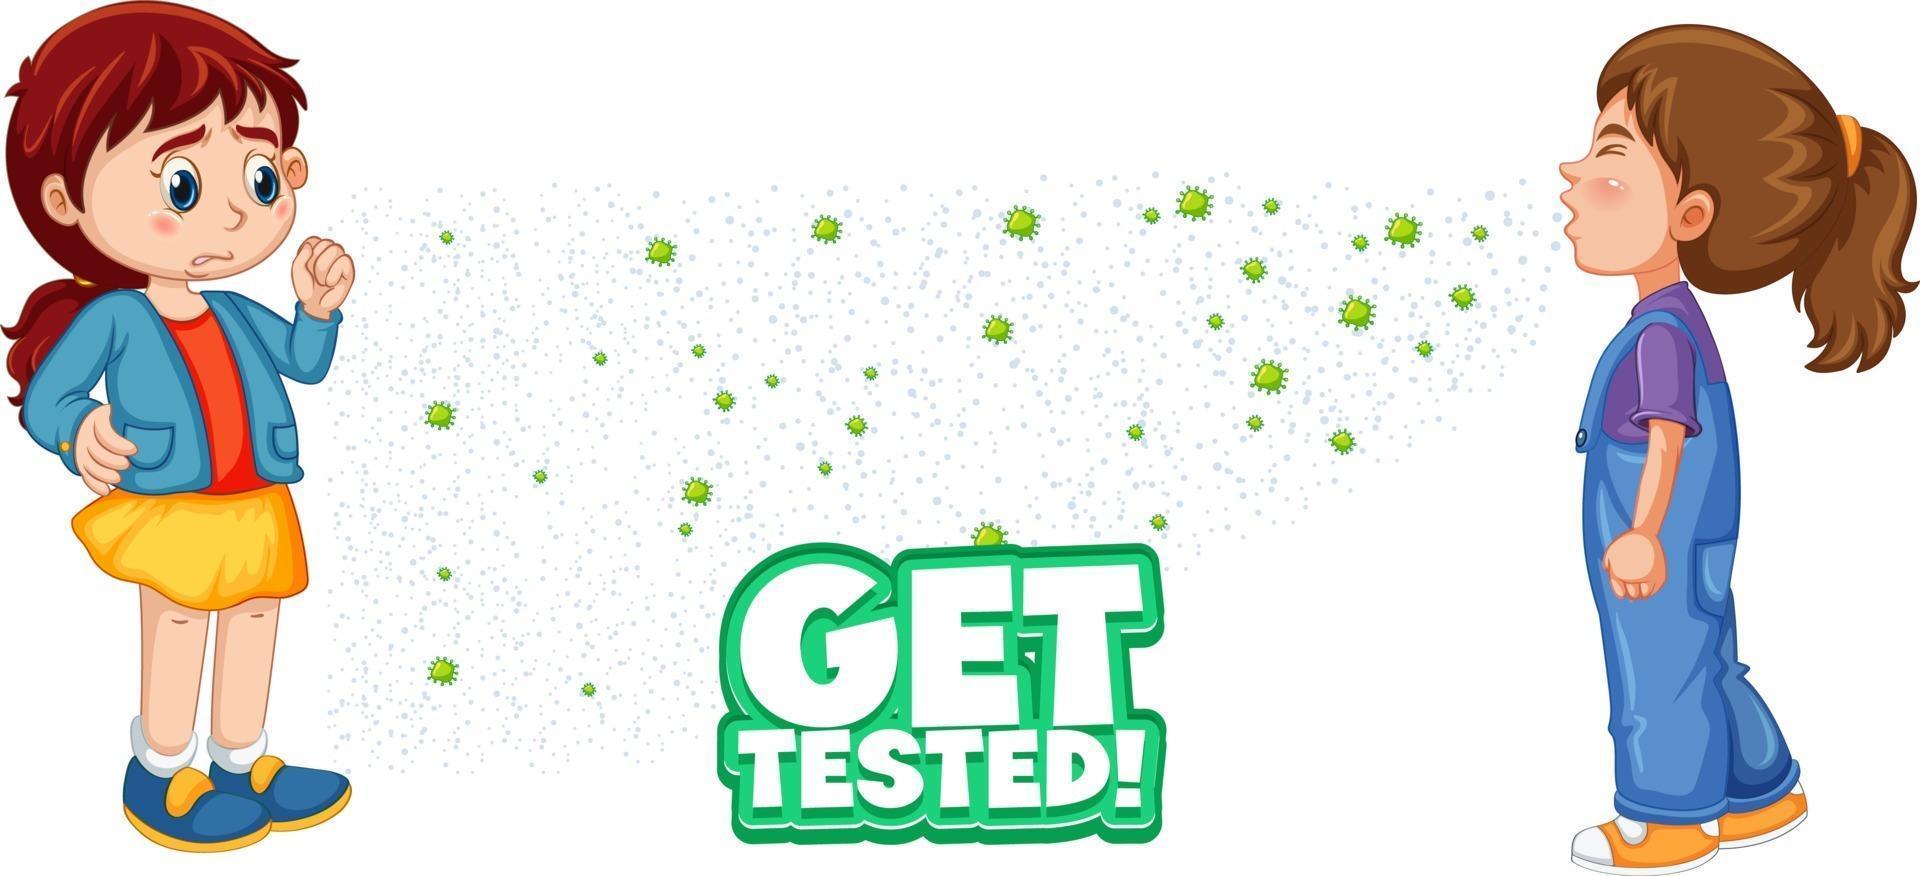 Get Tested font in cartoon style with a girl look at her friend sneezing isolated on white background vector